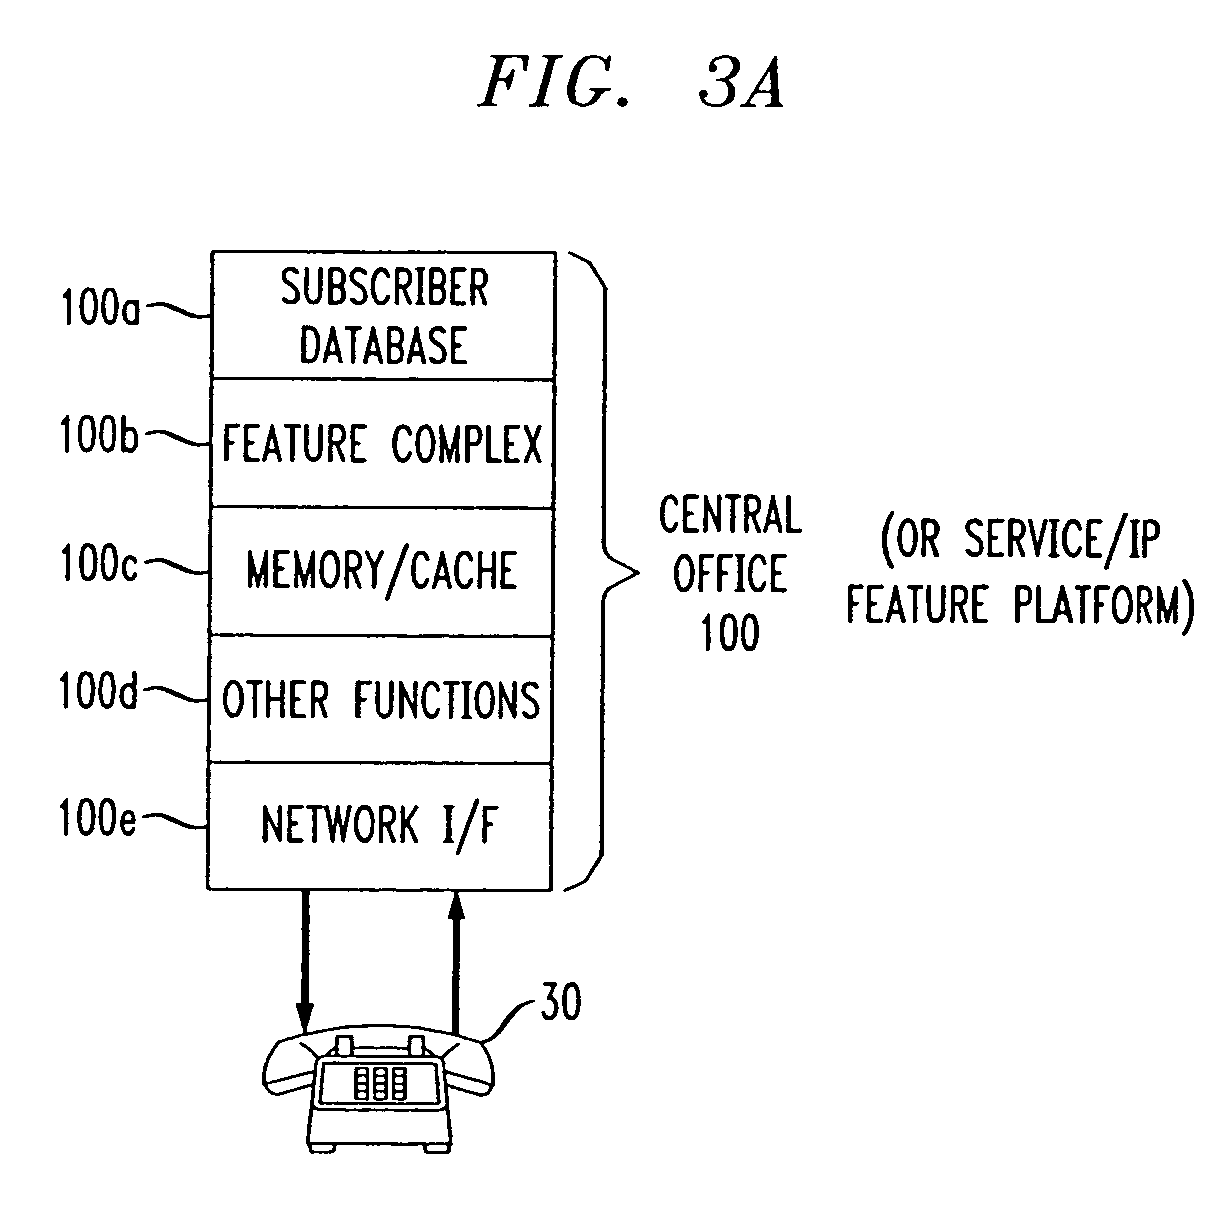 Network provided information using text-to-speech and speech recognition and text or speech activated network control sequences for complimentary feature access